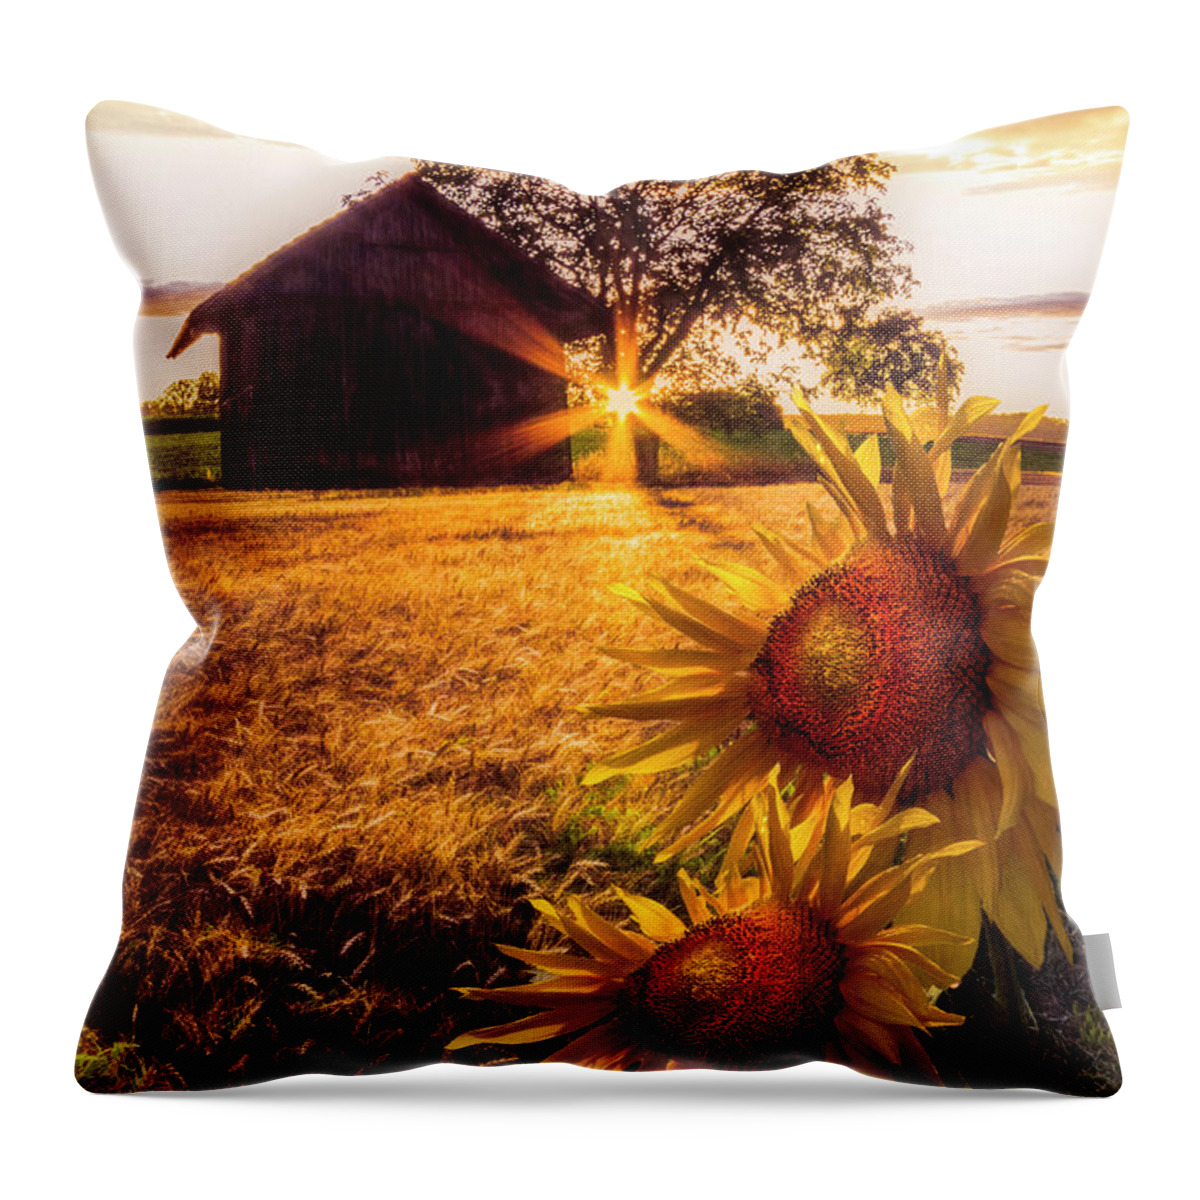 Barns Throw Pillow featuring the photograph Sunset Longing by Debra and Dave Vanderlaan